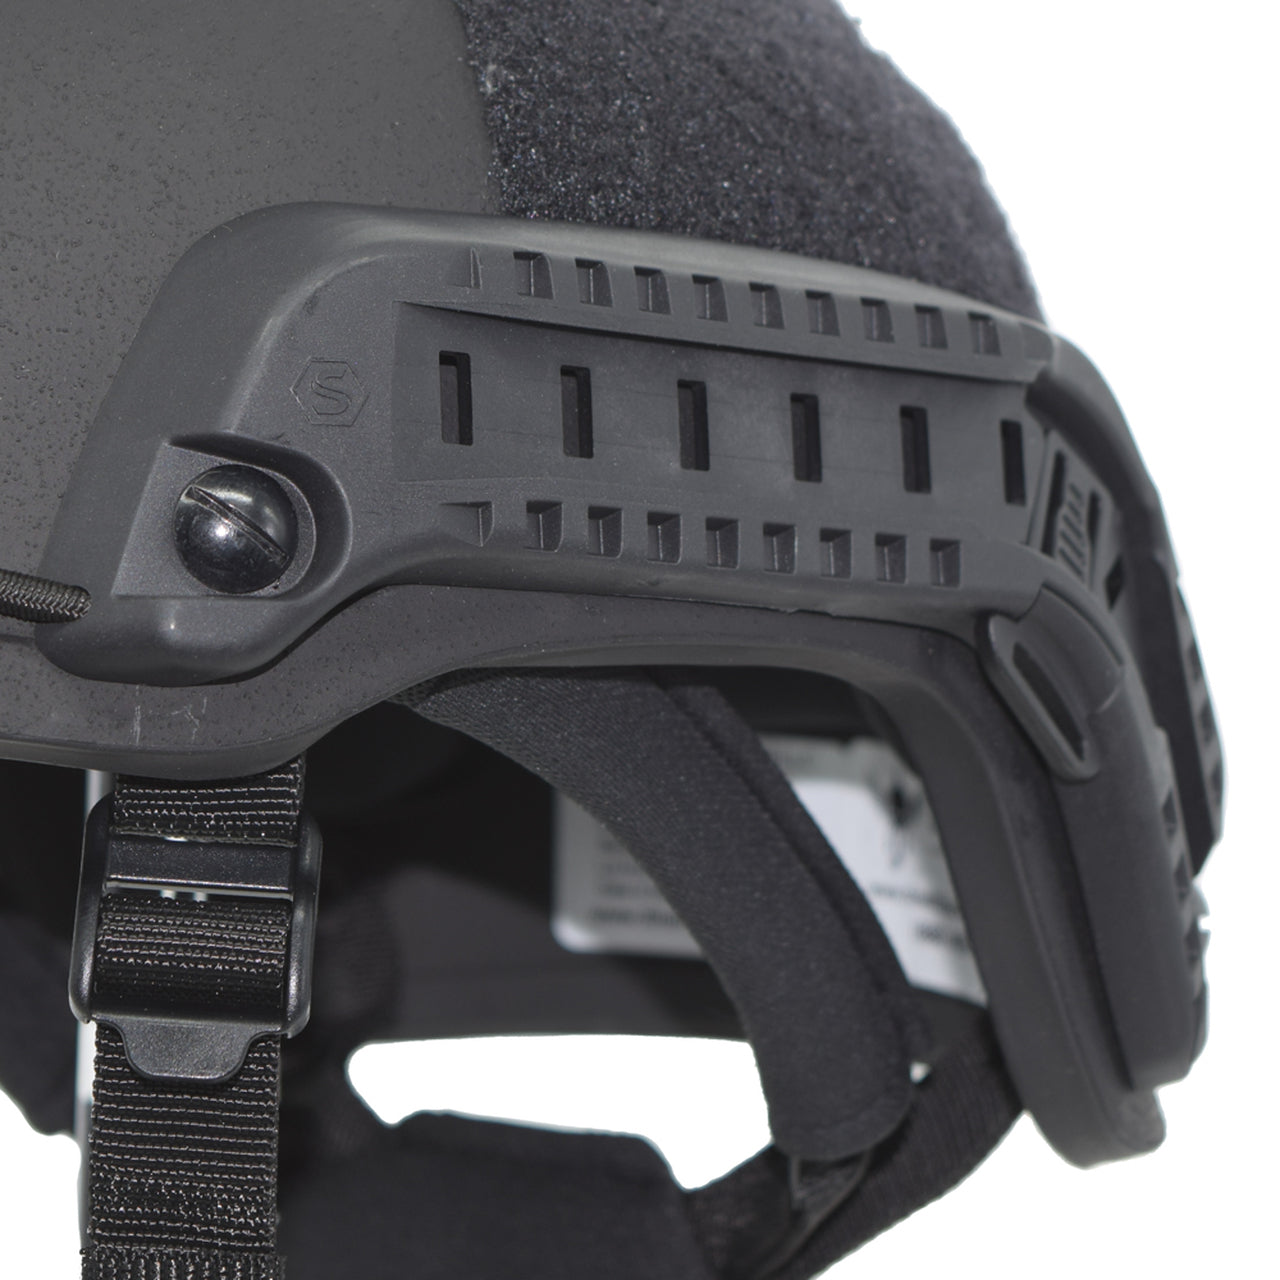 An image of a Shellback Tactical Level IIIA Spec Ops ACH High Cut Ballistic Helmet with a visor and straps.